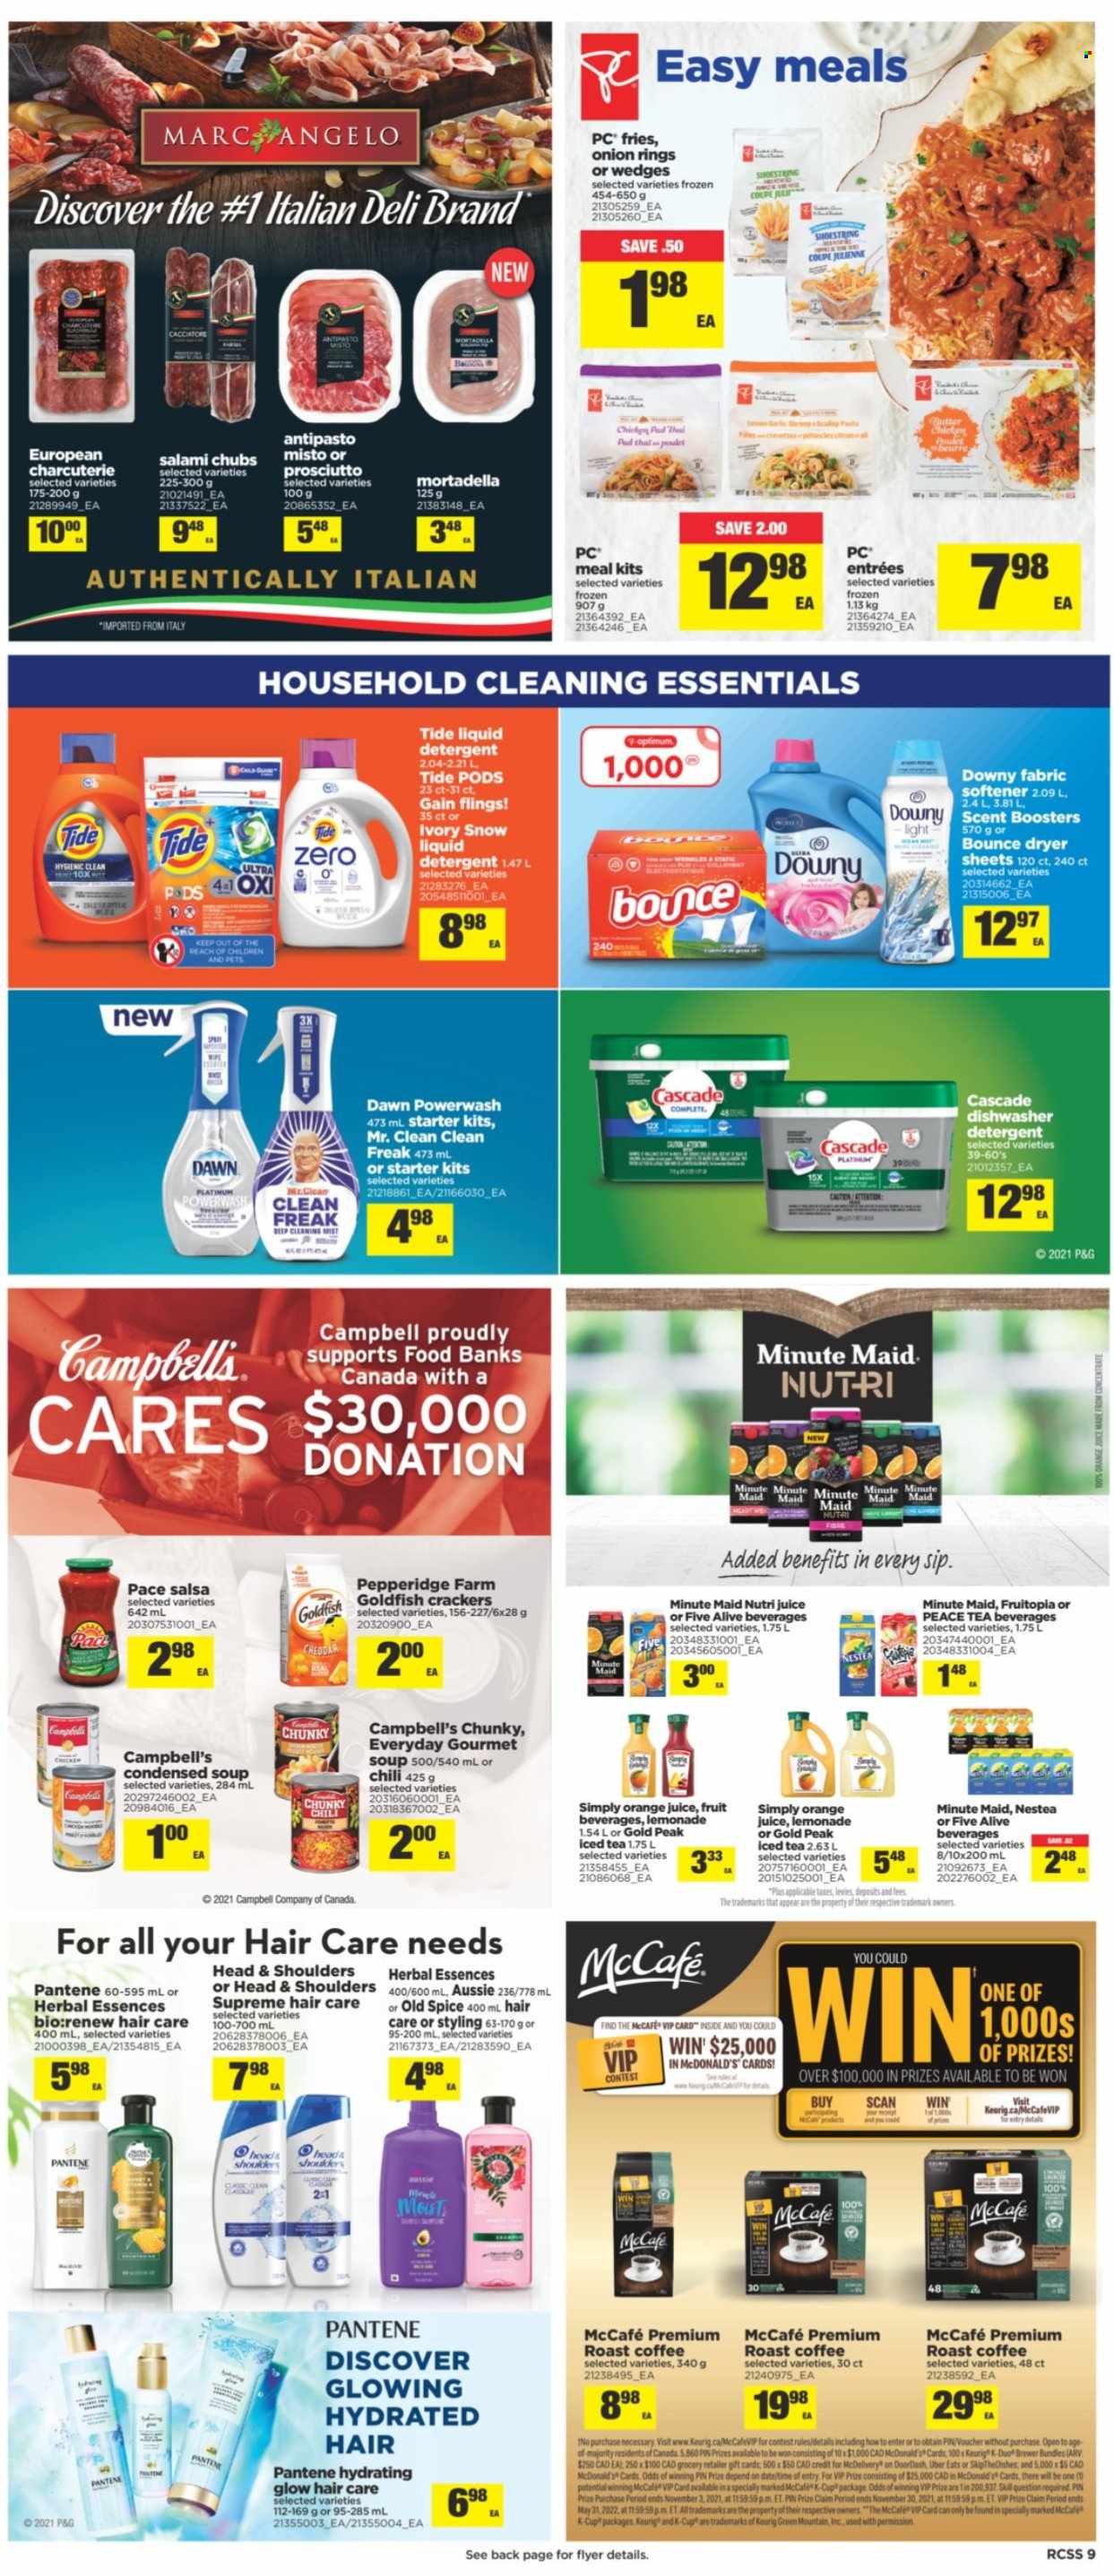 thumbnail - Real Canadian Superstore Flyer - September 30, 2021 - October 06, 2021 - Sales products - Campbell's, onion rings, condensed soup, soup, instant soup, mortadella, salami, prosciutto, cheese, butter, potato fries, crackers, Goldfish, brewer, spice, salsa, lemonade, orange juice, juice, ice tea, fruit punch, coffee, coffee capsules, L'Or, McCafe, K-Cups, Keurig, Green Mountain, Gain, Tide, fabric softener, liquid detergent, Bounce, Cascade, dryer sheets, scent booster, Downy Laundry, Aussie, Herbal Essences, pin, detergent, Head & Shoulders, Pantene, Old Spice. Page 9.